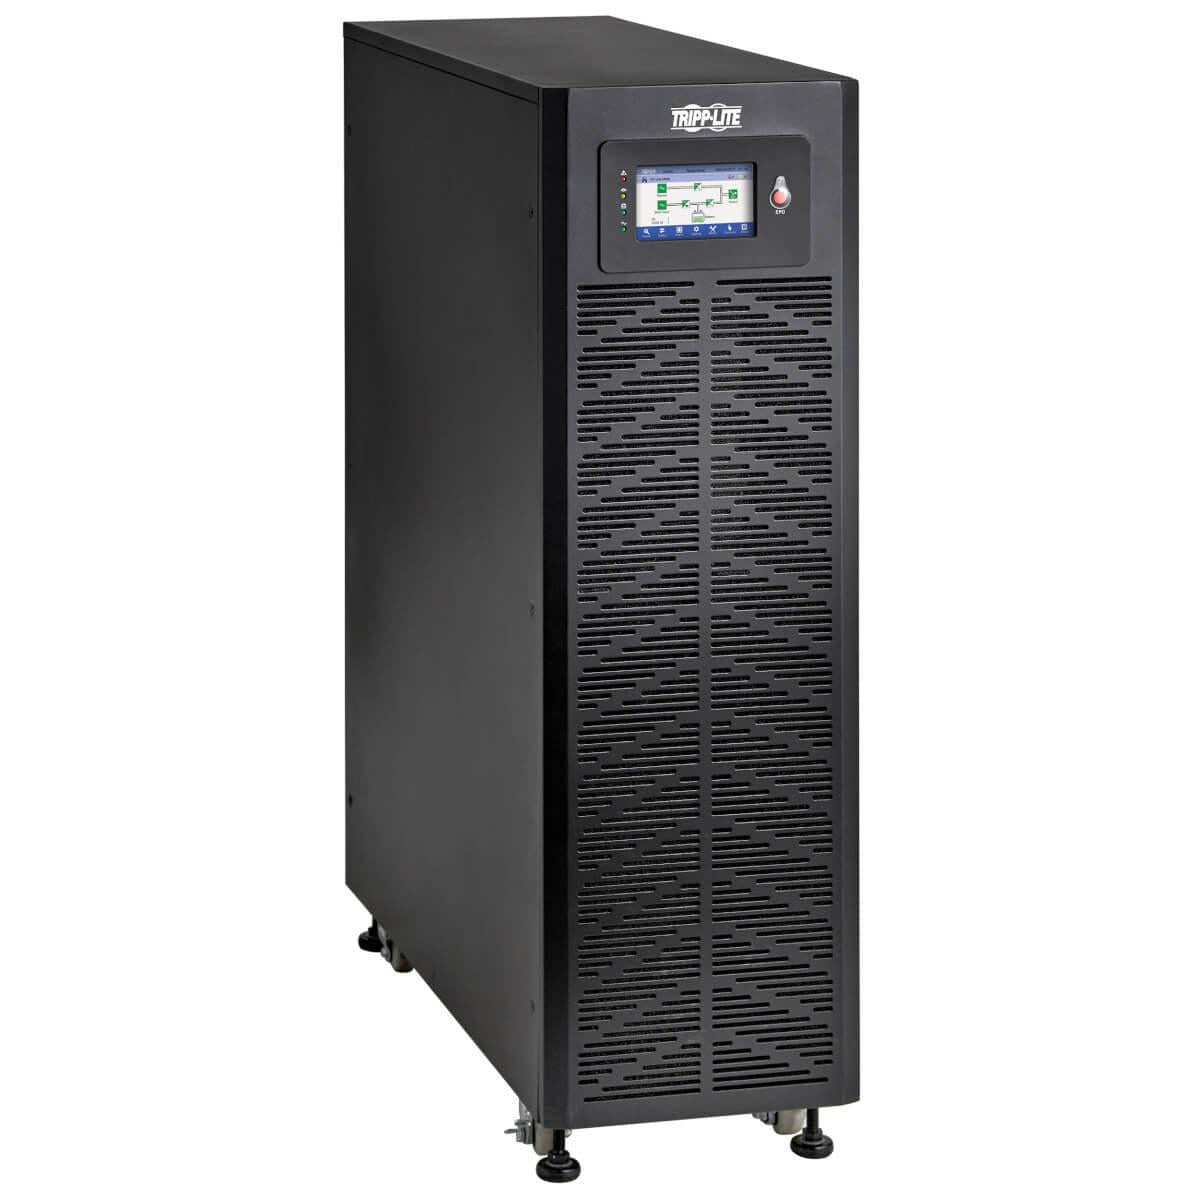 Tripp Lite 3-Phase 208/220/120/127V 30Kva/Kw Double-Conversion Ups - Unity Pf, External Batteries Required